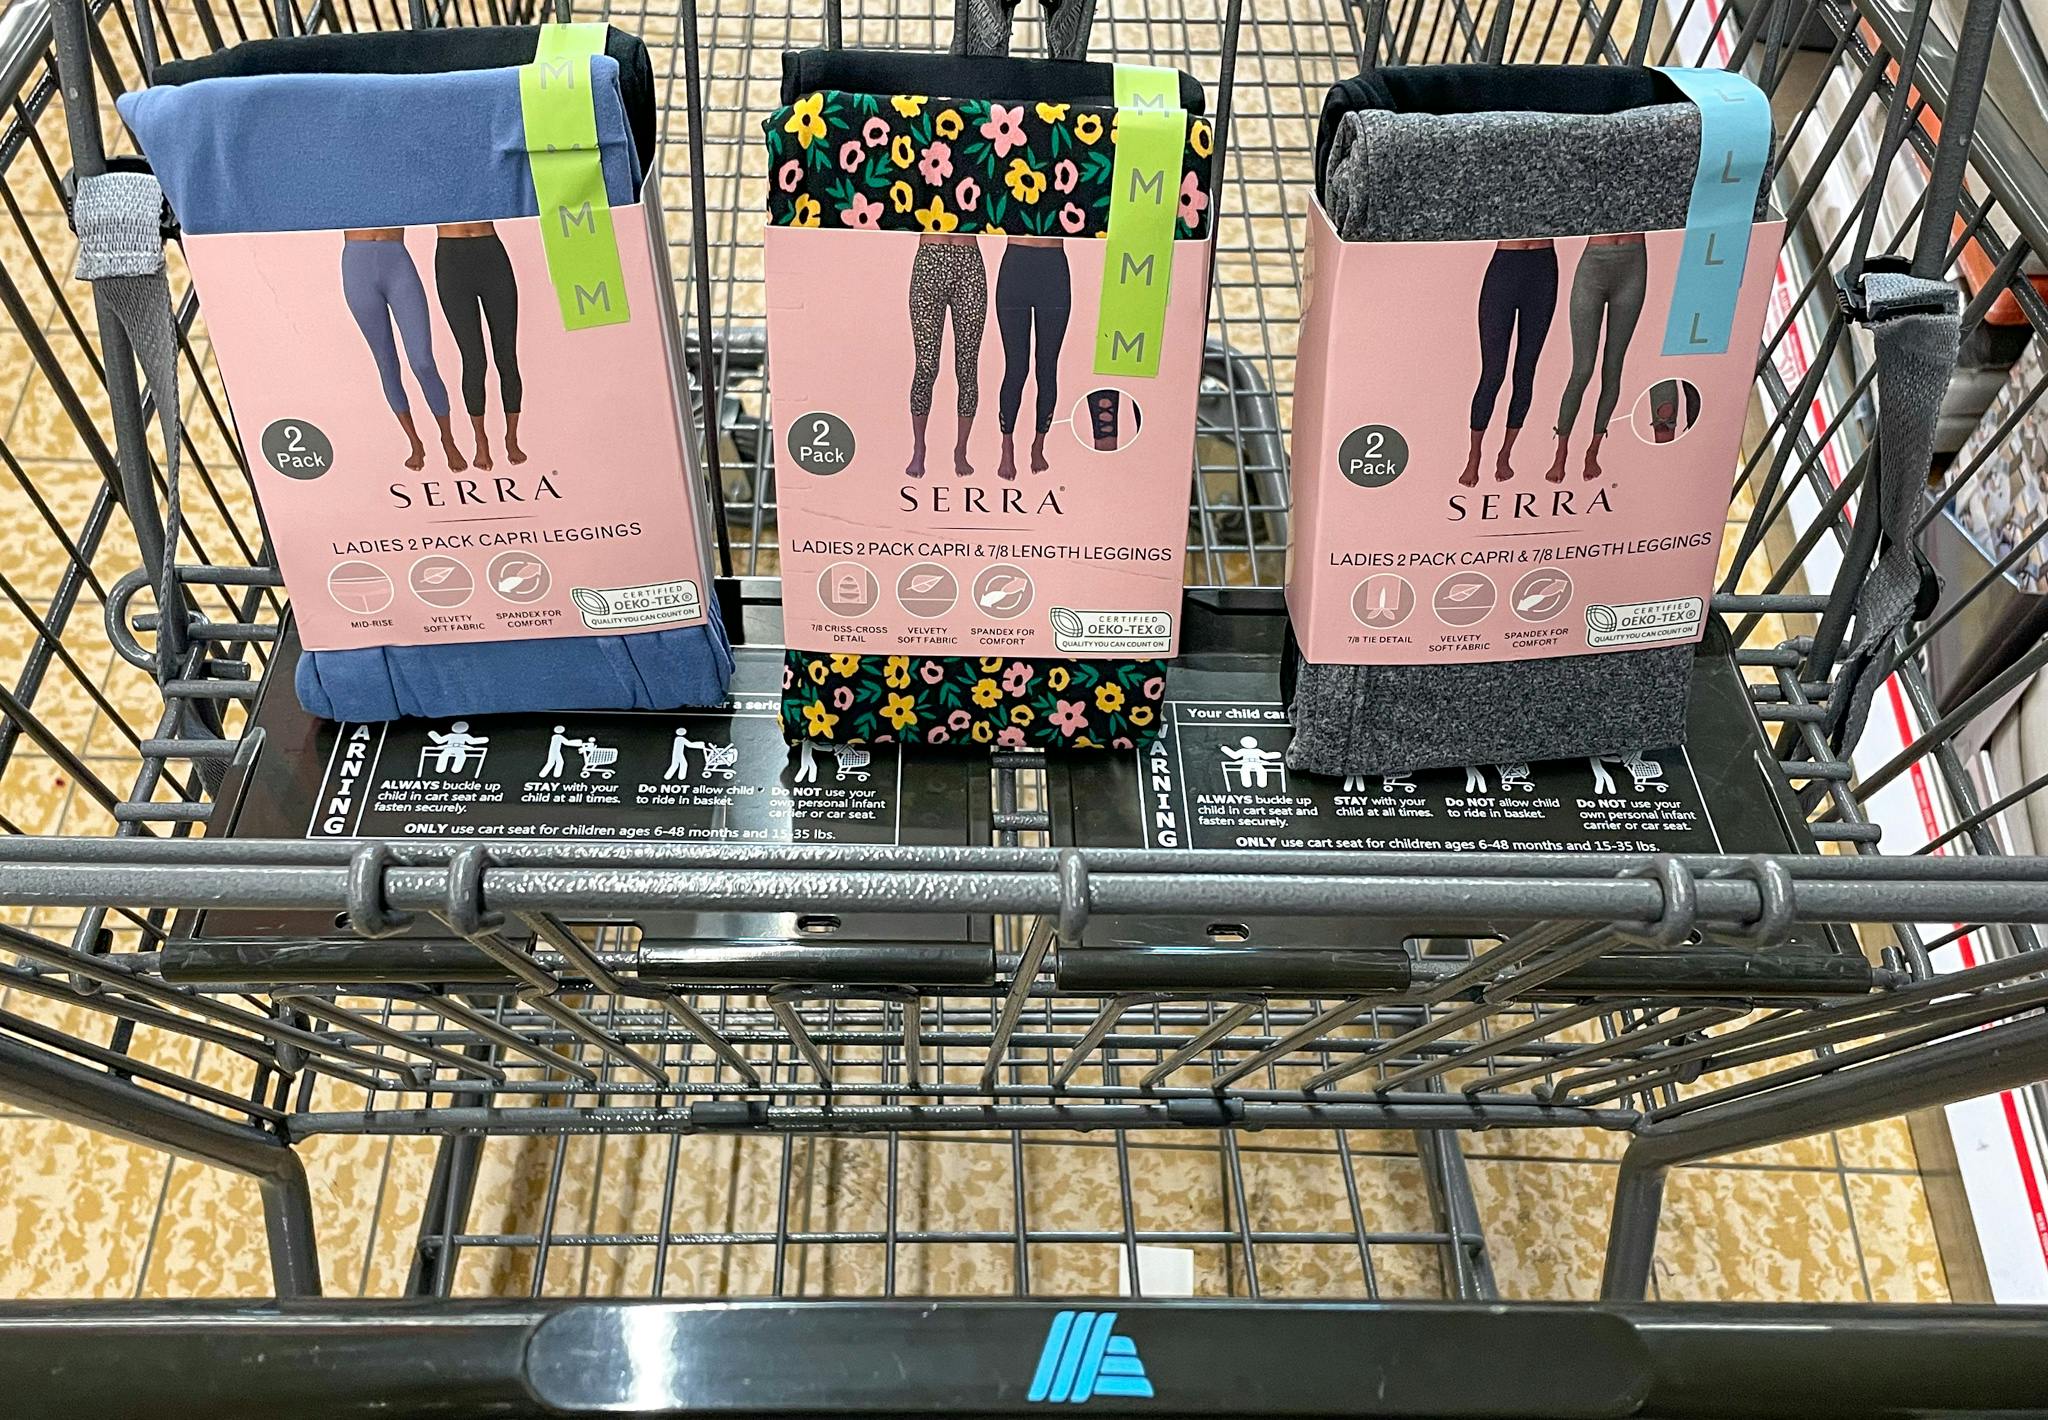 variety of women's leggings in a cart at aldi